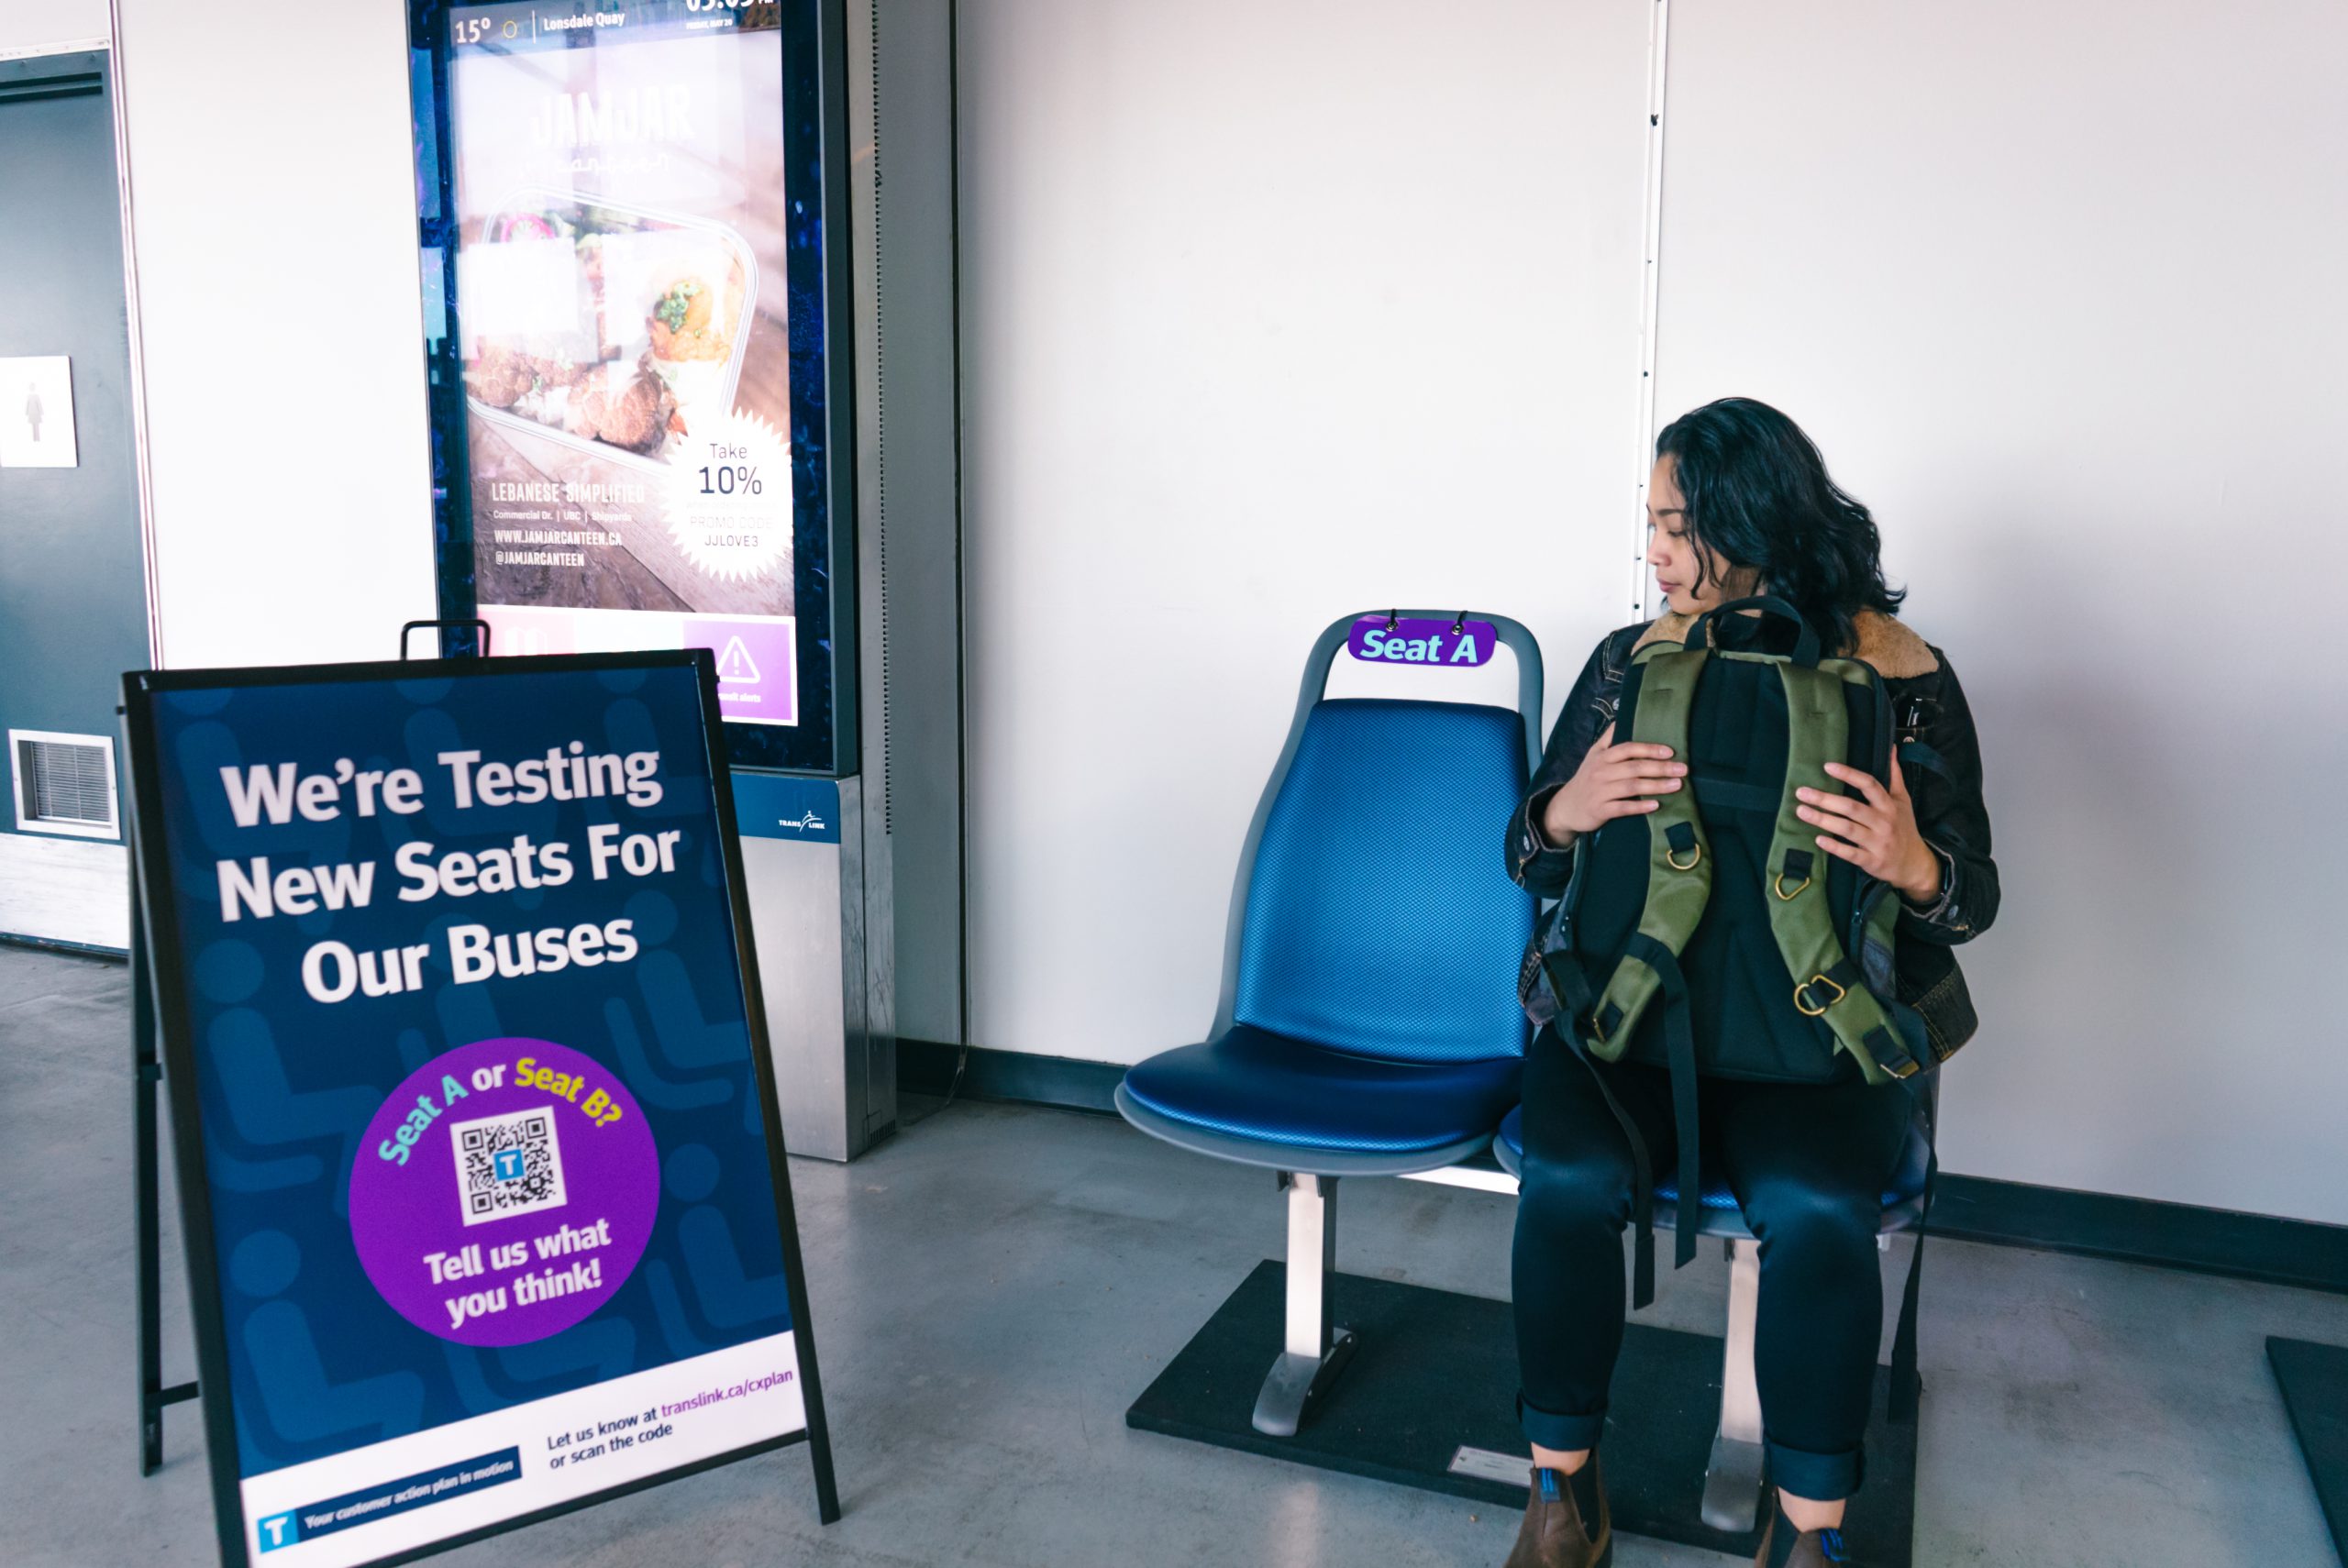 Bus seat testing site with information sandwich board on left and person sitting in bus seat on right, while looking at bus seat next to them on left.